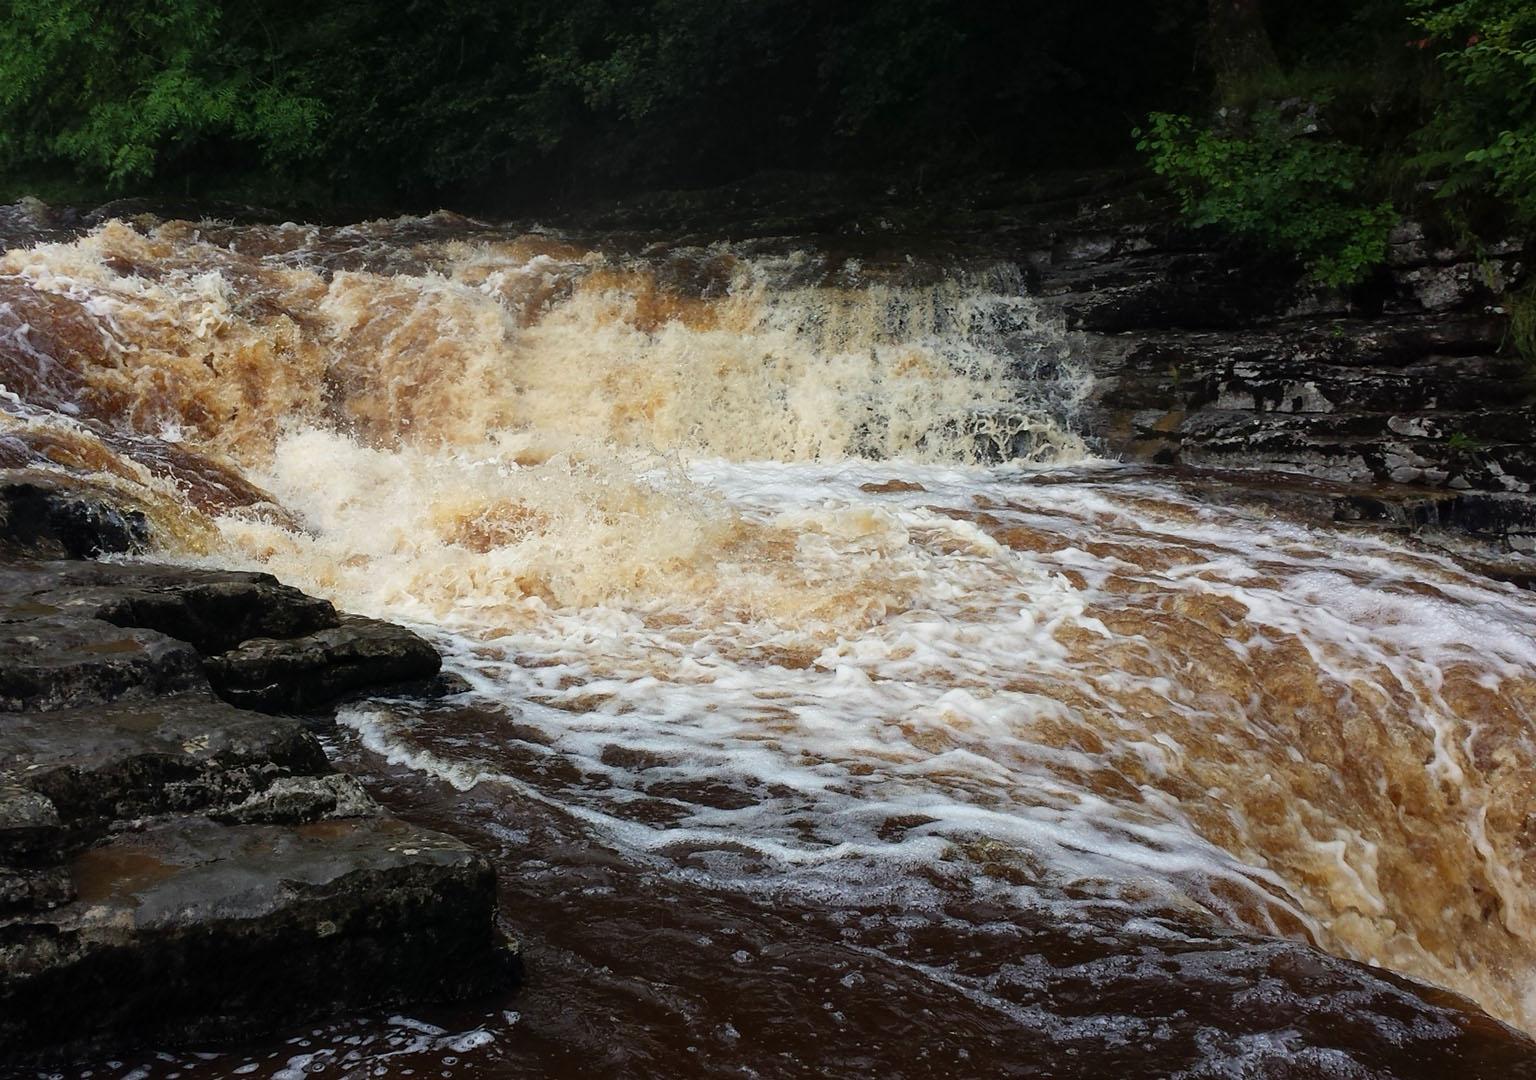 Turbulent river water showing brown staining from dissolved organic matter